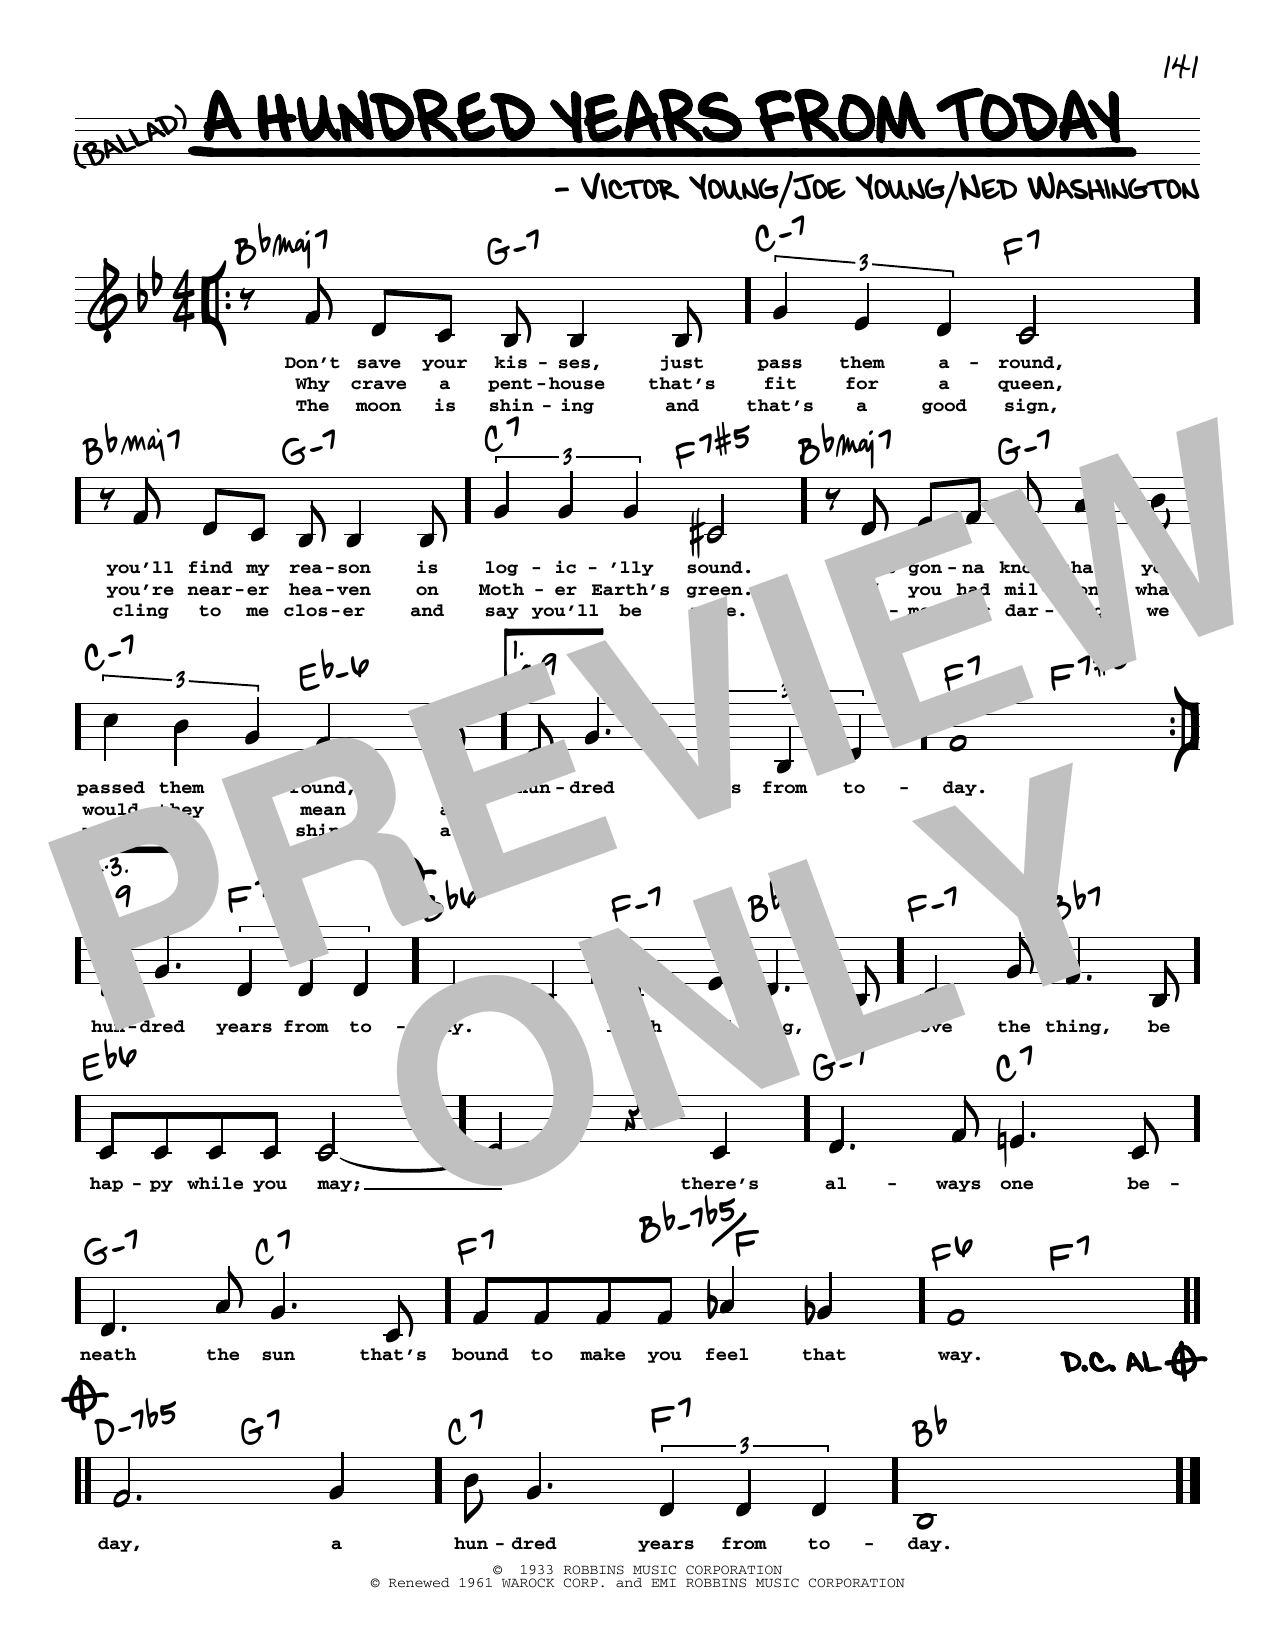 Frank Sinatra A Hundred Years From Today (Low Voice) sheet music notes printable PDF score